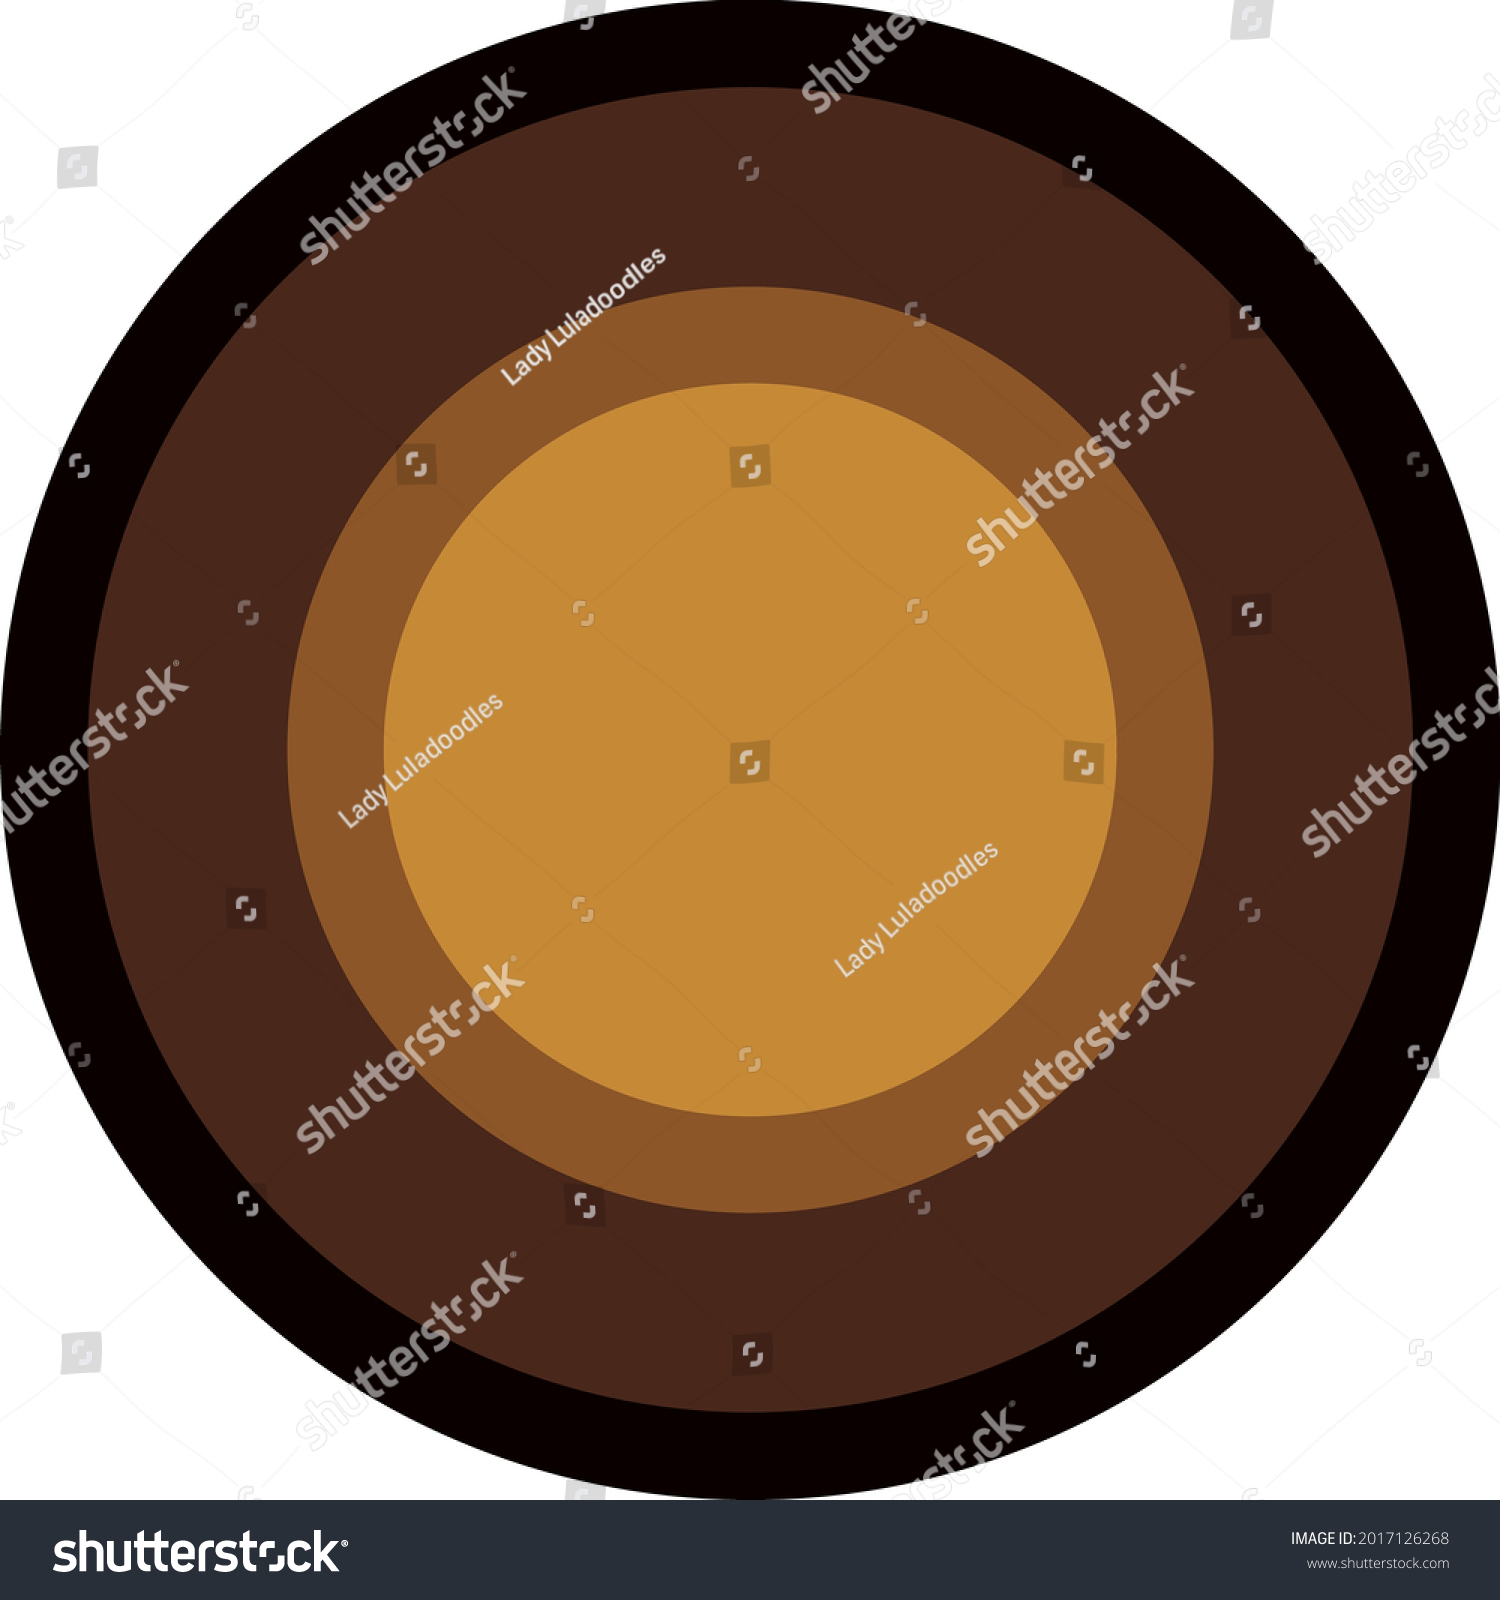 SVG of Bullseye style circular Chocolate candy with dark to light toffee brown, in concentric circles. Layered confectionary SVG svg